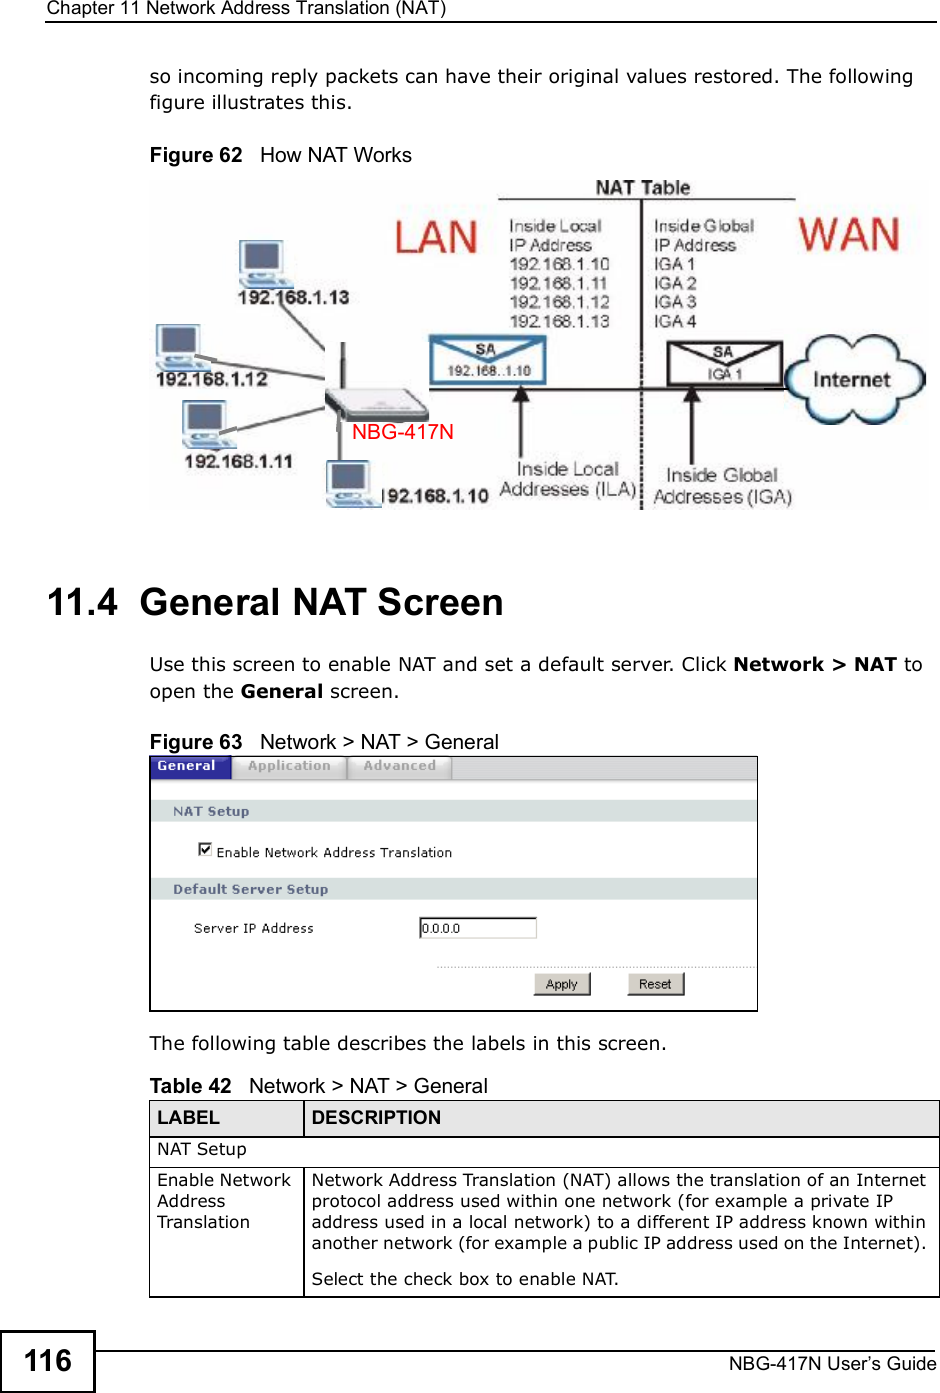 Chapter 11Network Address Translation (NAT)NBG-417N User s Guide116so incoming reply packets can have their original values restored. The following figure illustrates this.Figure 62   How NAT Works11.4  General NAT ScreenUse this screen to enable NAT and set a default server. Click Network &gt; NAT to open the General screen.Figure 63   Network &gt; NAT &gt; General The following table describes the labels in this screen.NBG-417NTable 42   Network &gt; NAT &gt; GeneralLABEL DESCRIPTIONNAT SetupEnable Network Address TranslationNetwork Address Translation (NAT) allows the translation of an Internet protocol address used within one network (for example a private IP address used in a local network) to a different IP address known within another network (for example a public IP address used on the Internet). Select the check box to enable NAT.